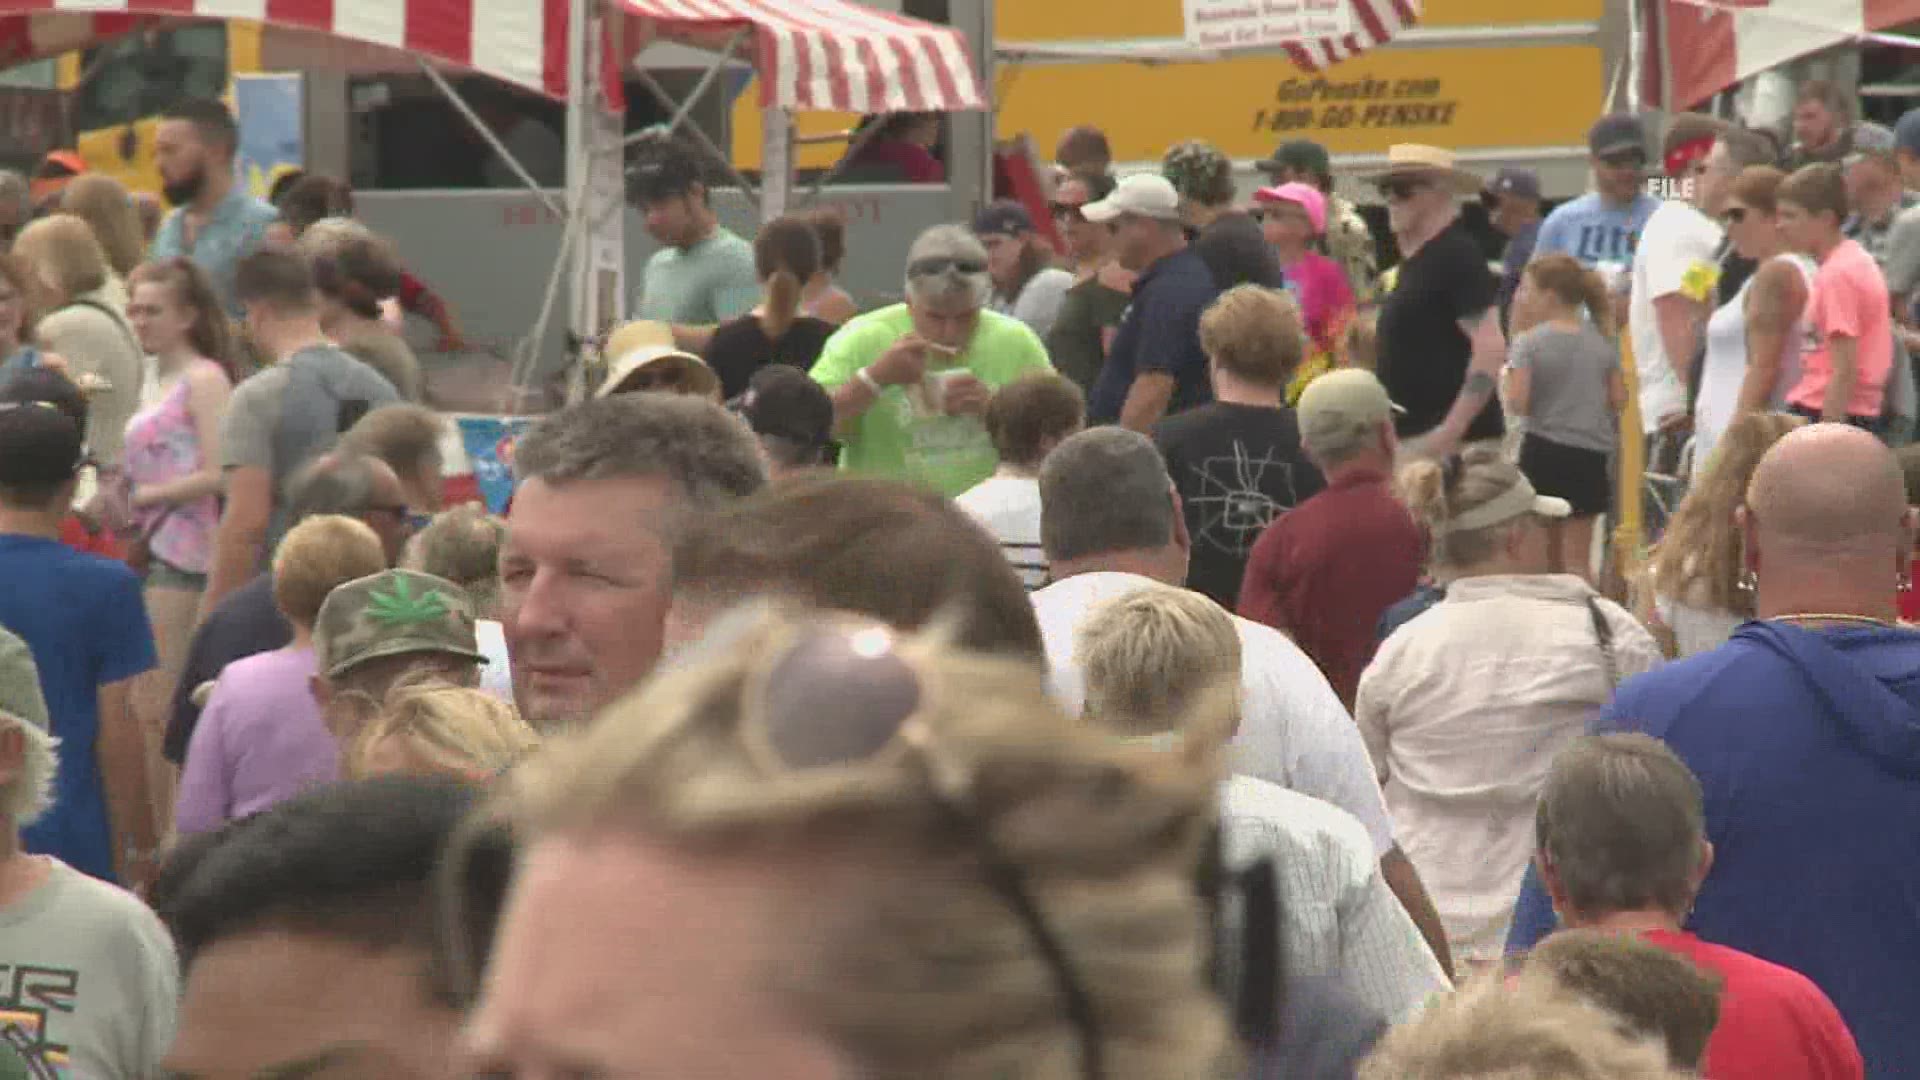 This year's Lobster Festival in Rockland has been canceled due to the COVID-19 pandemic.